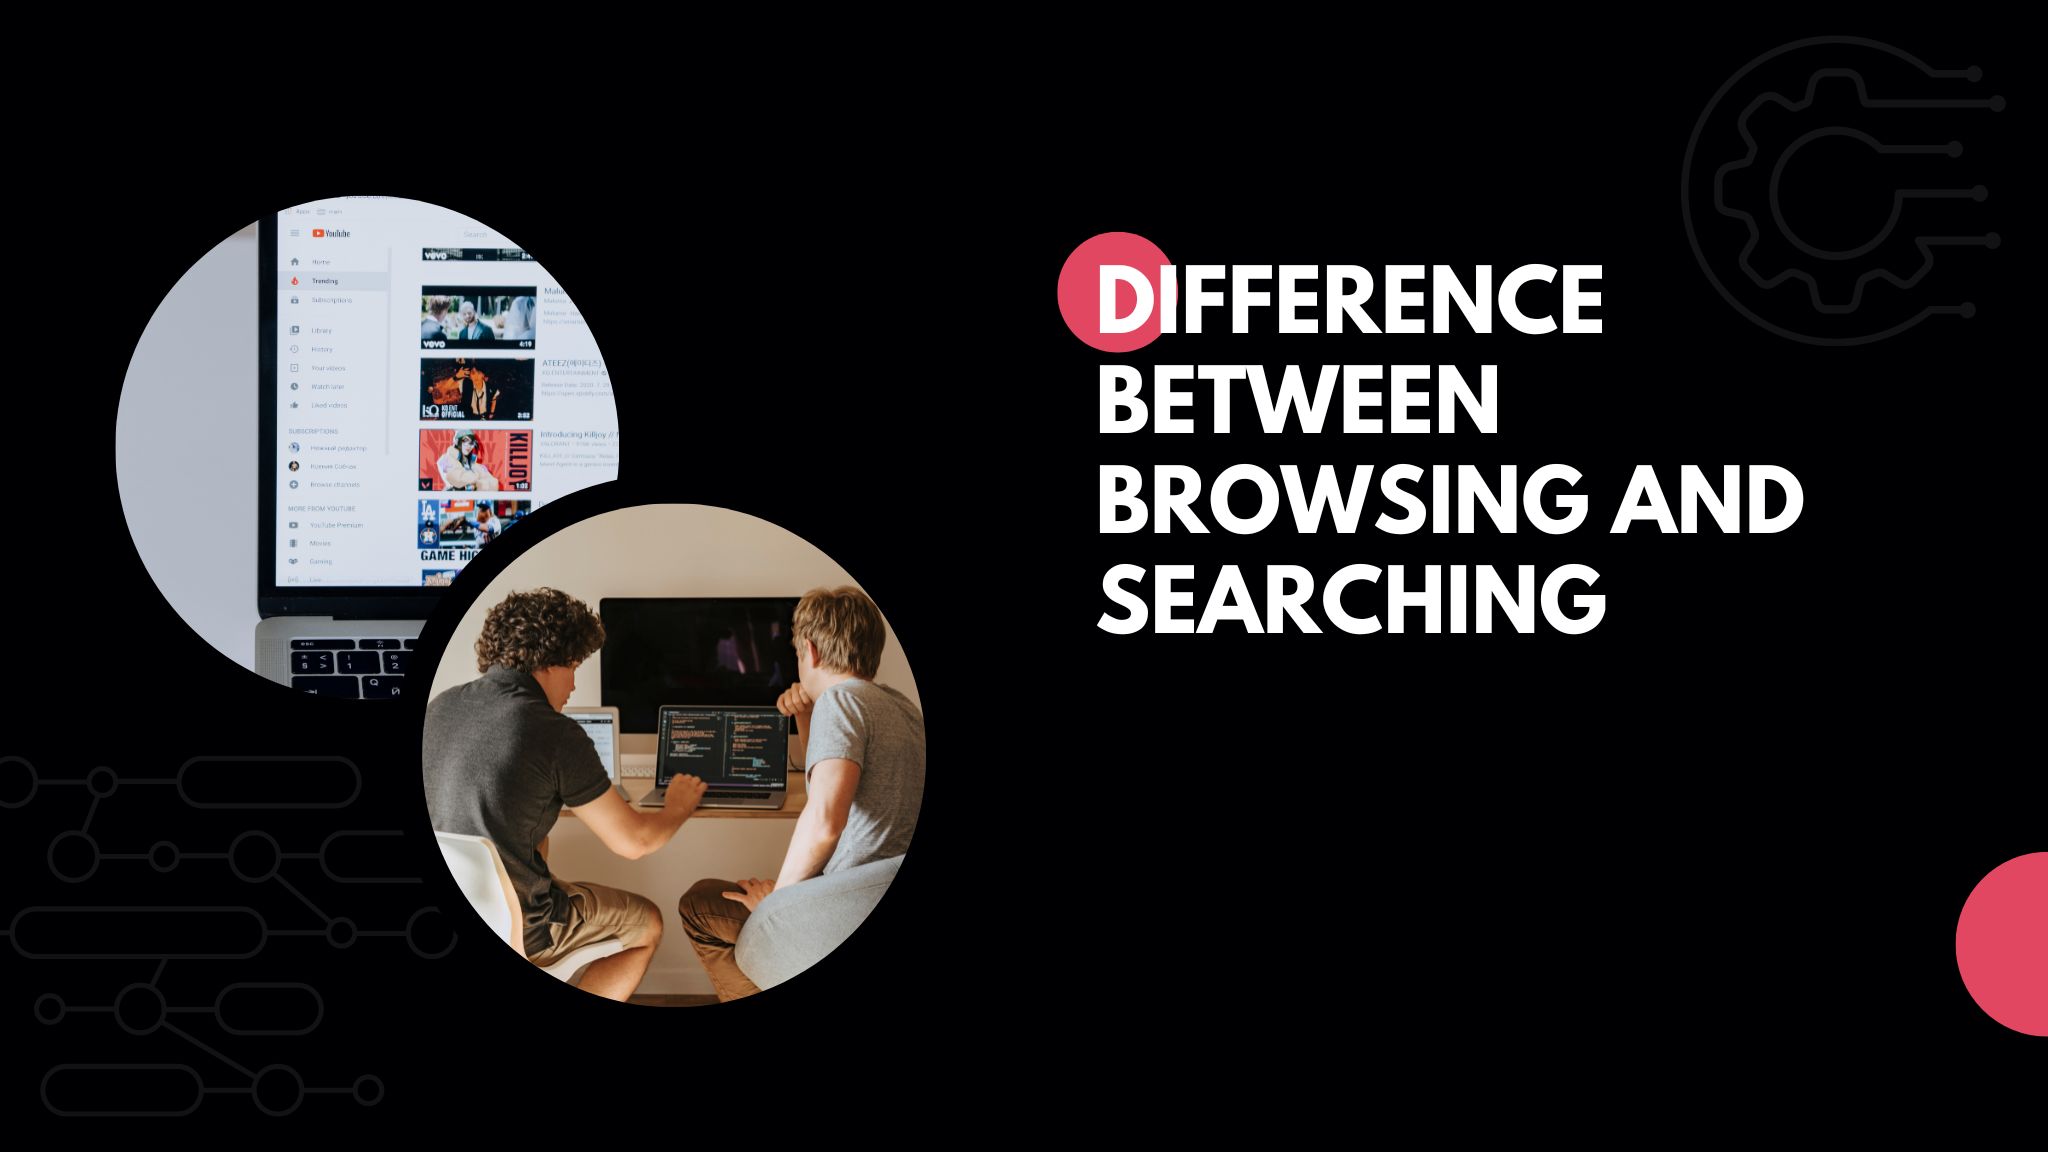 The Difference Between Browsing and Searching